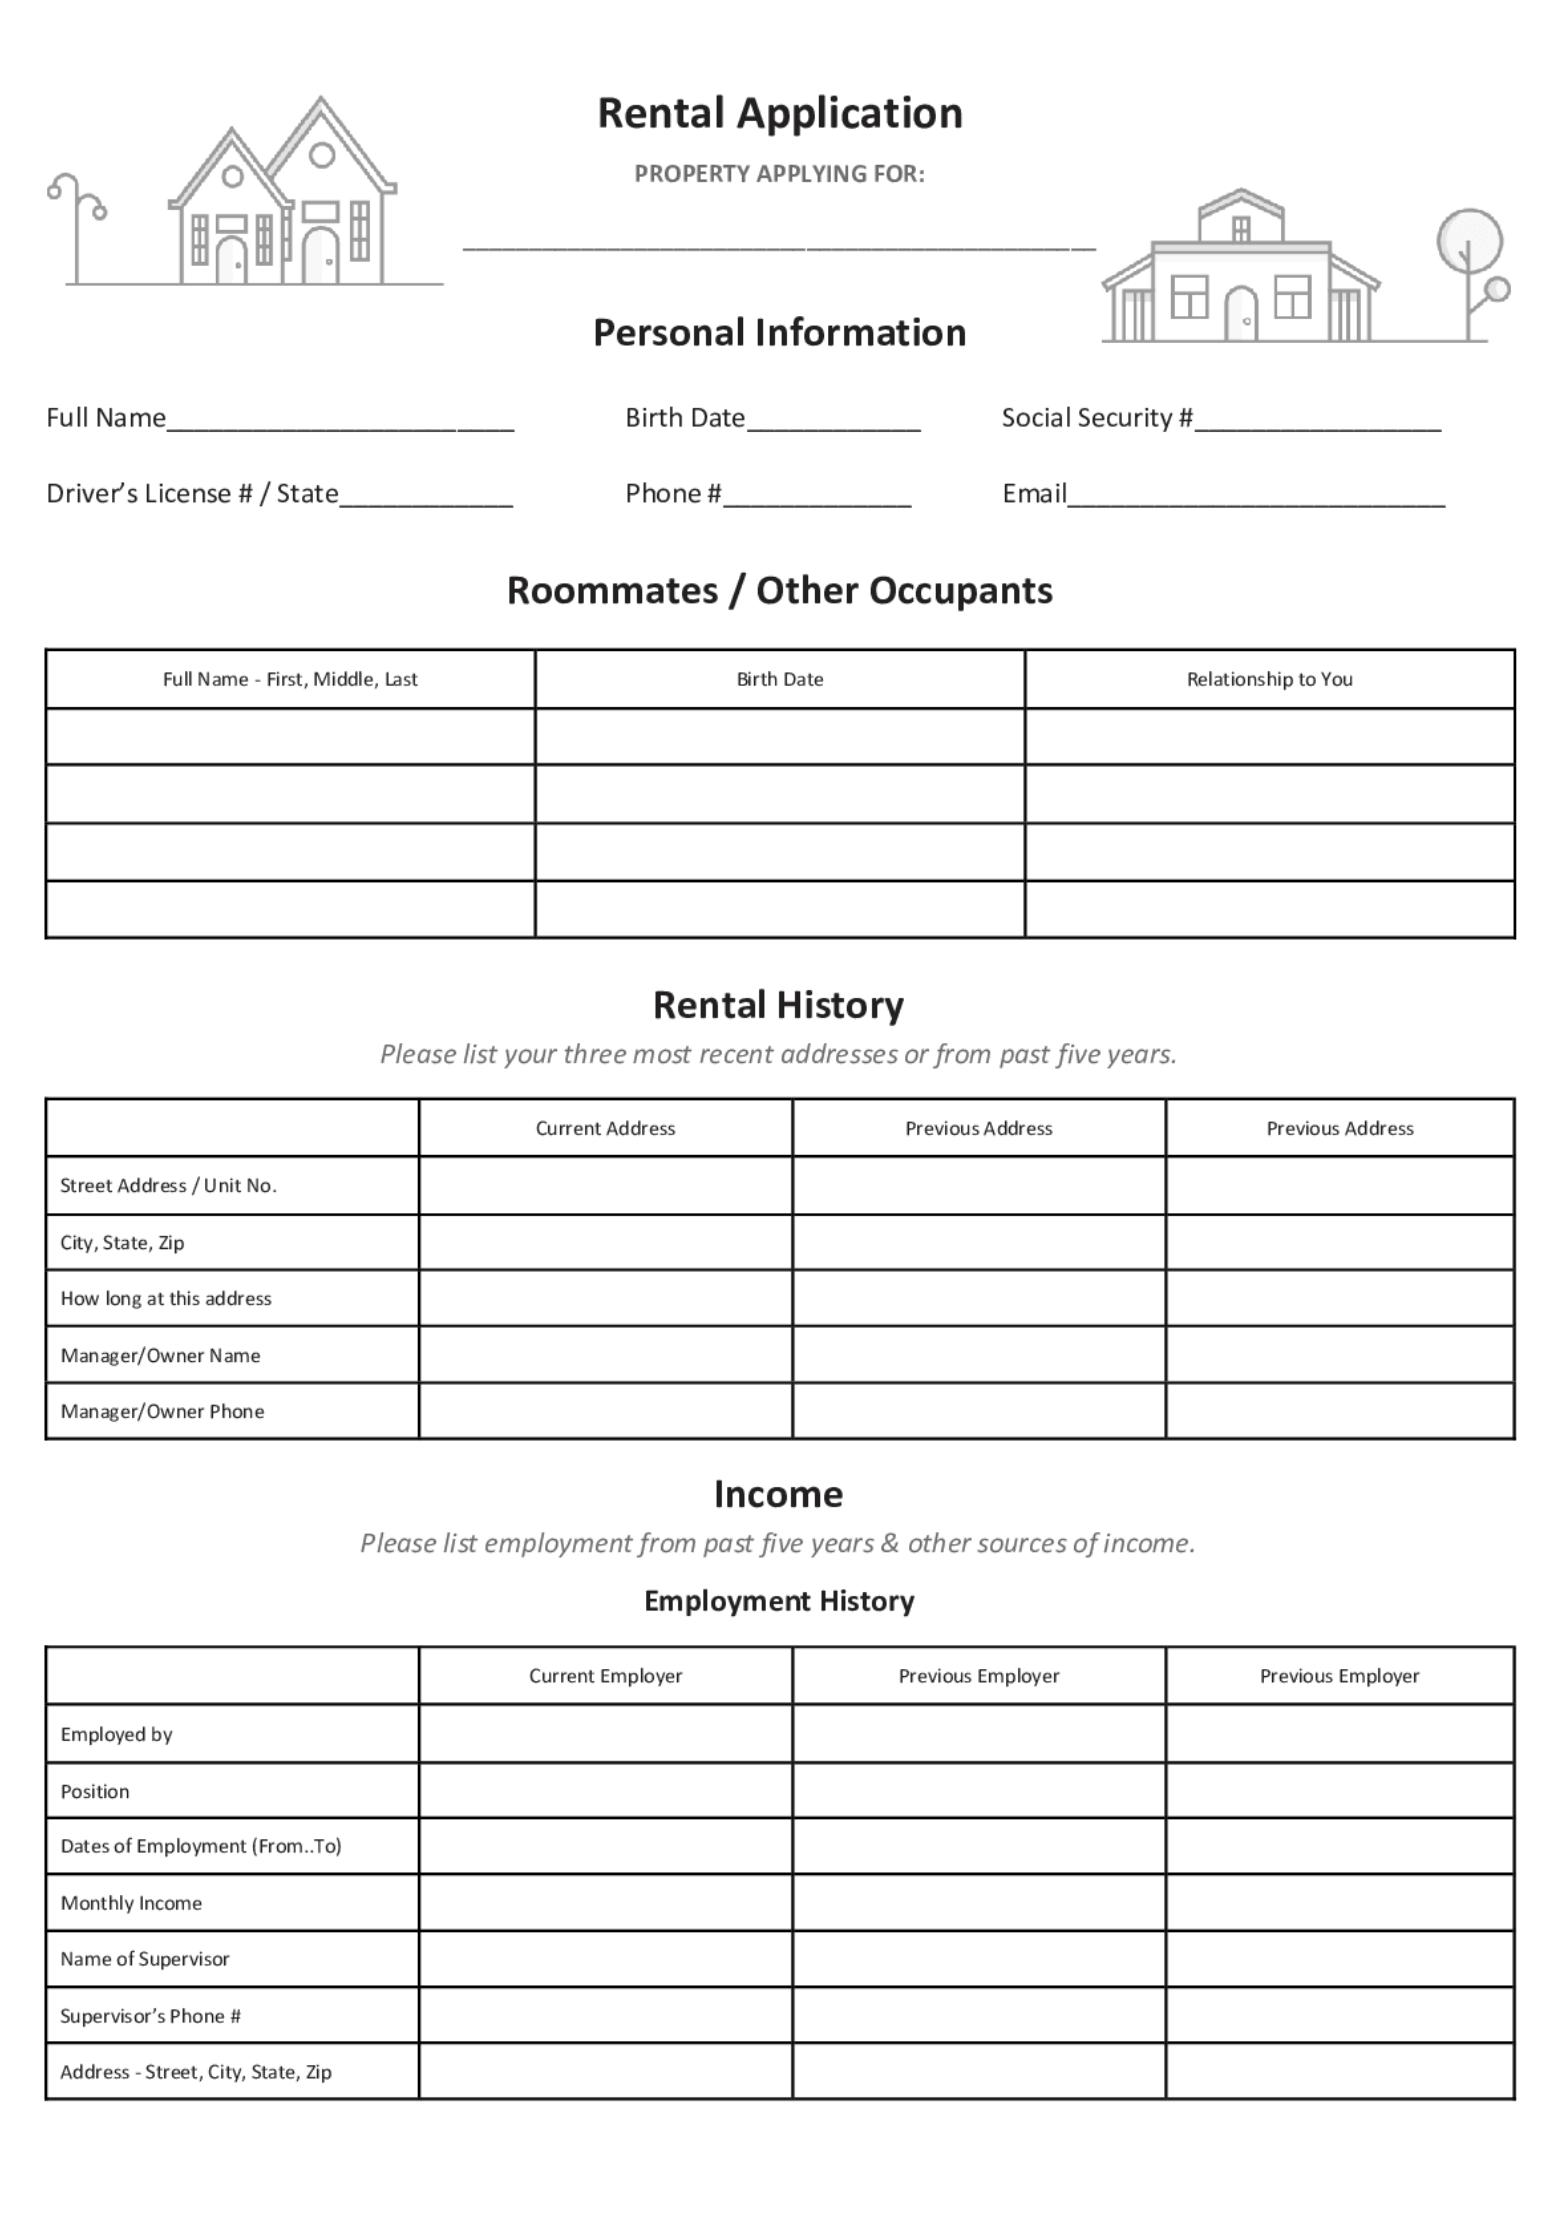 iPropertyManagement Residential Application Form